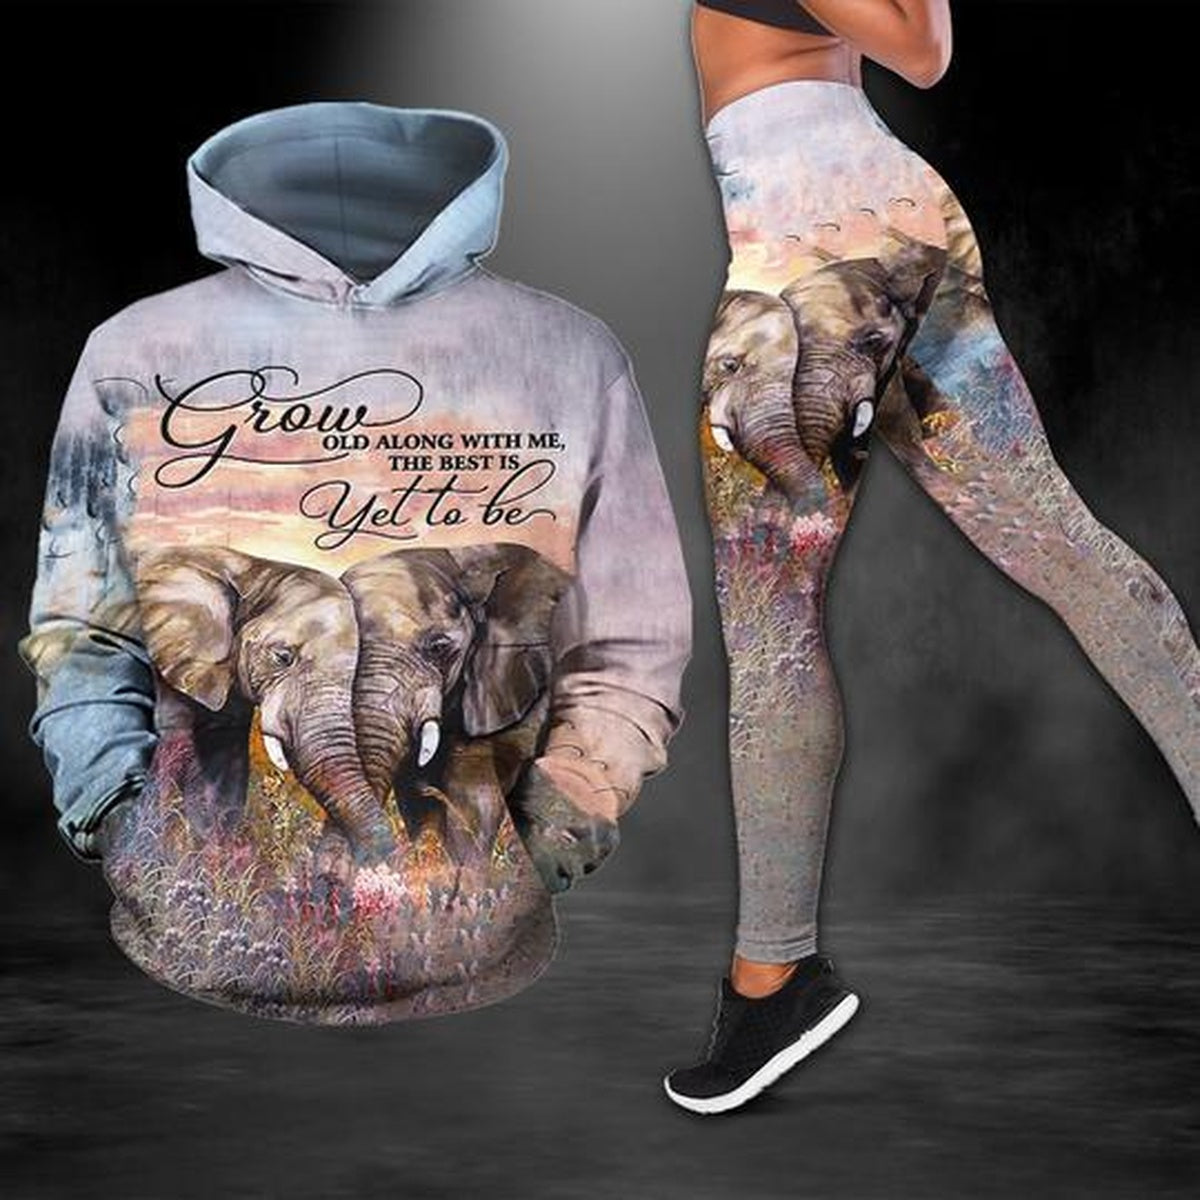 Grow Old Along With Me The Best Is Yet To Be Couple Legging Hoodie ,Elephant Legging Hoodie